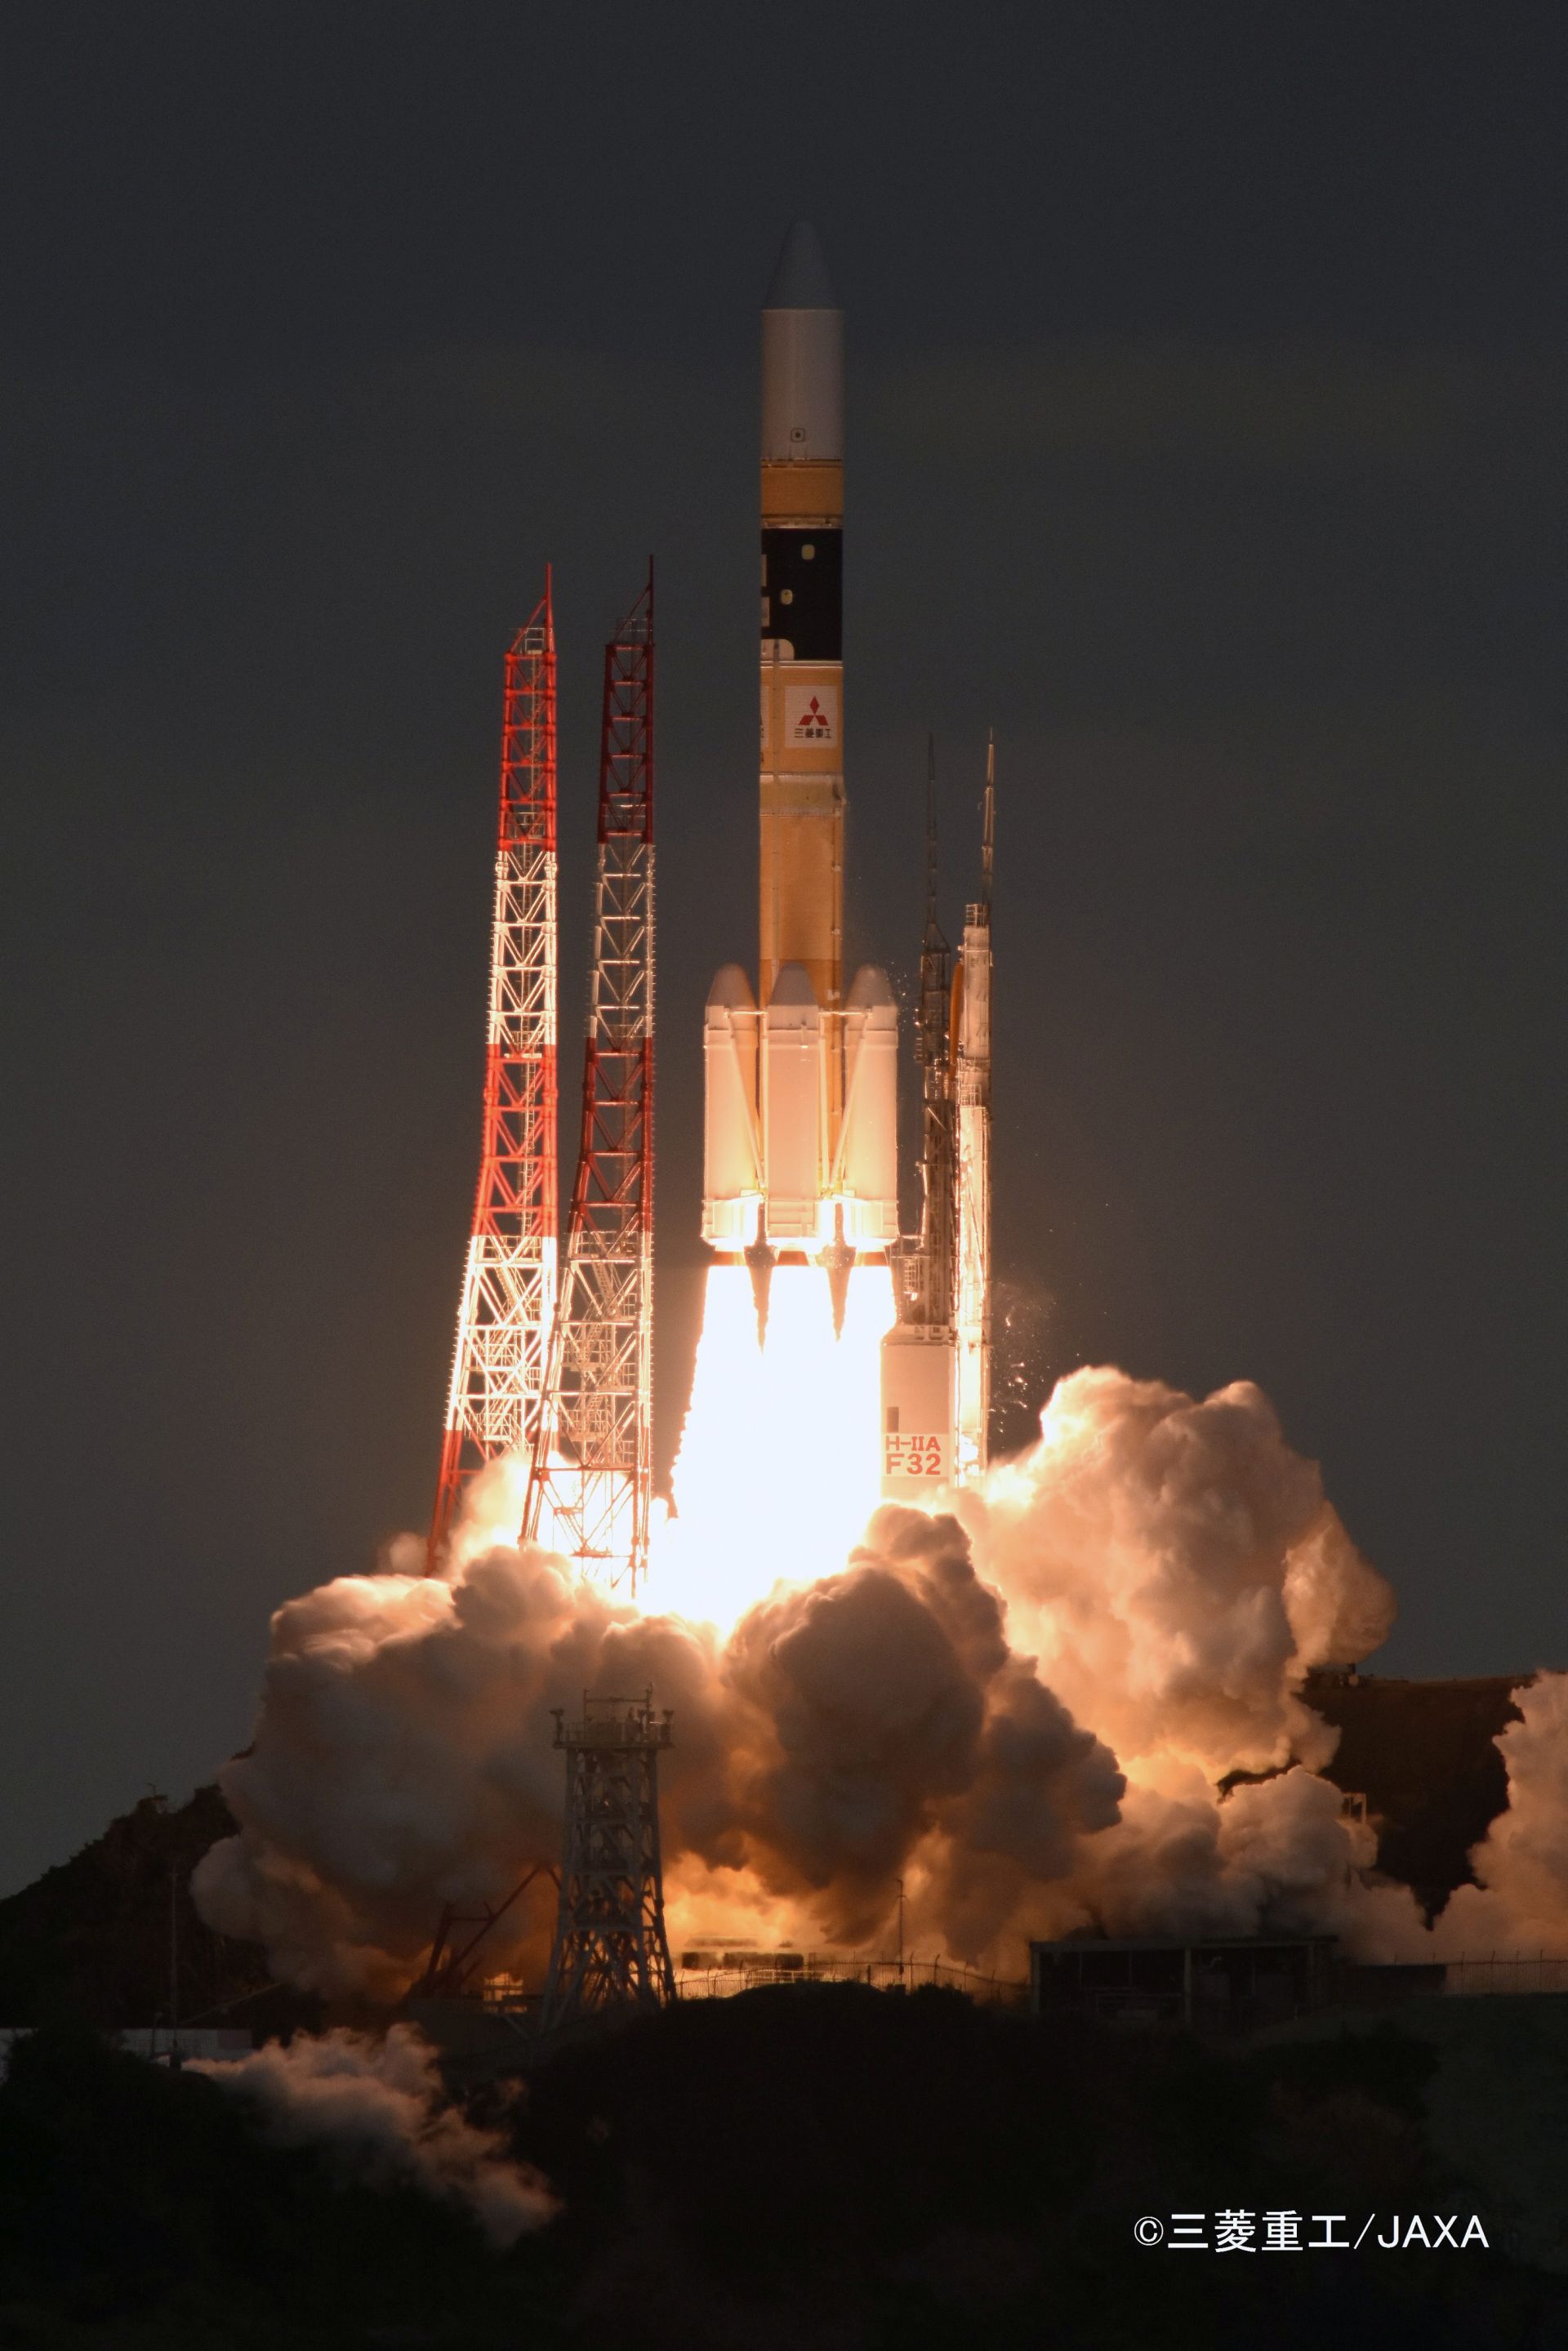 epa05747783 A handout photo made available by the Japan Aerospace Exploration Agency (JAXA) on 25 January 2017 shows an H-2A rocket carrying a defense communications satellite launching from Tanegashima Space Center in Kagoshima Prefecture, southwestern Japan, 24 January 2017. According to the Japanese Defense Ministry, the satellite is the first defense military communications satellite to be launched in order to improve Japan Self-Defense Forces' communications system.  EPA/JAPAN AEROSPACE EXPLORATION AGENCY / HANDOUT  HANDOUT EDITORIAL USE ONLY/NO SALES